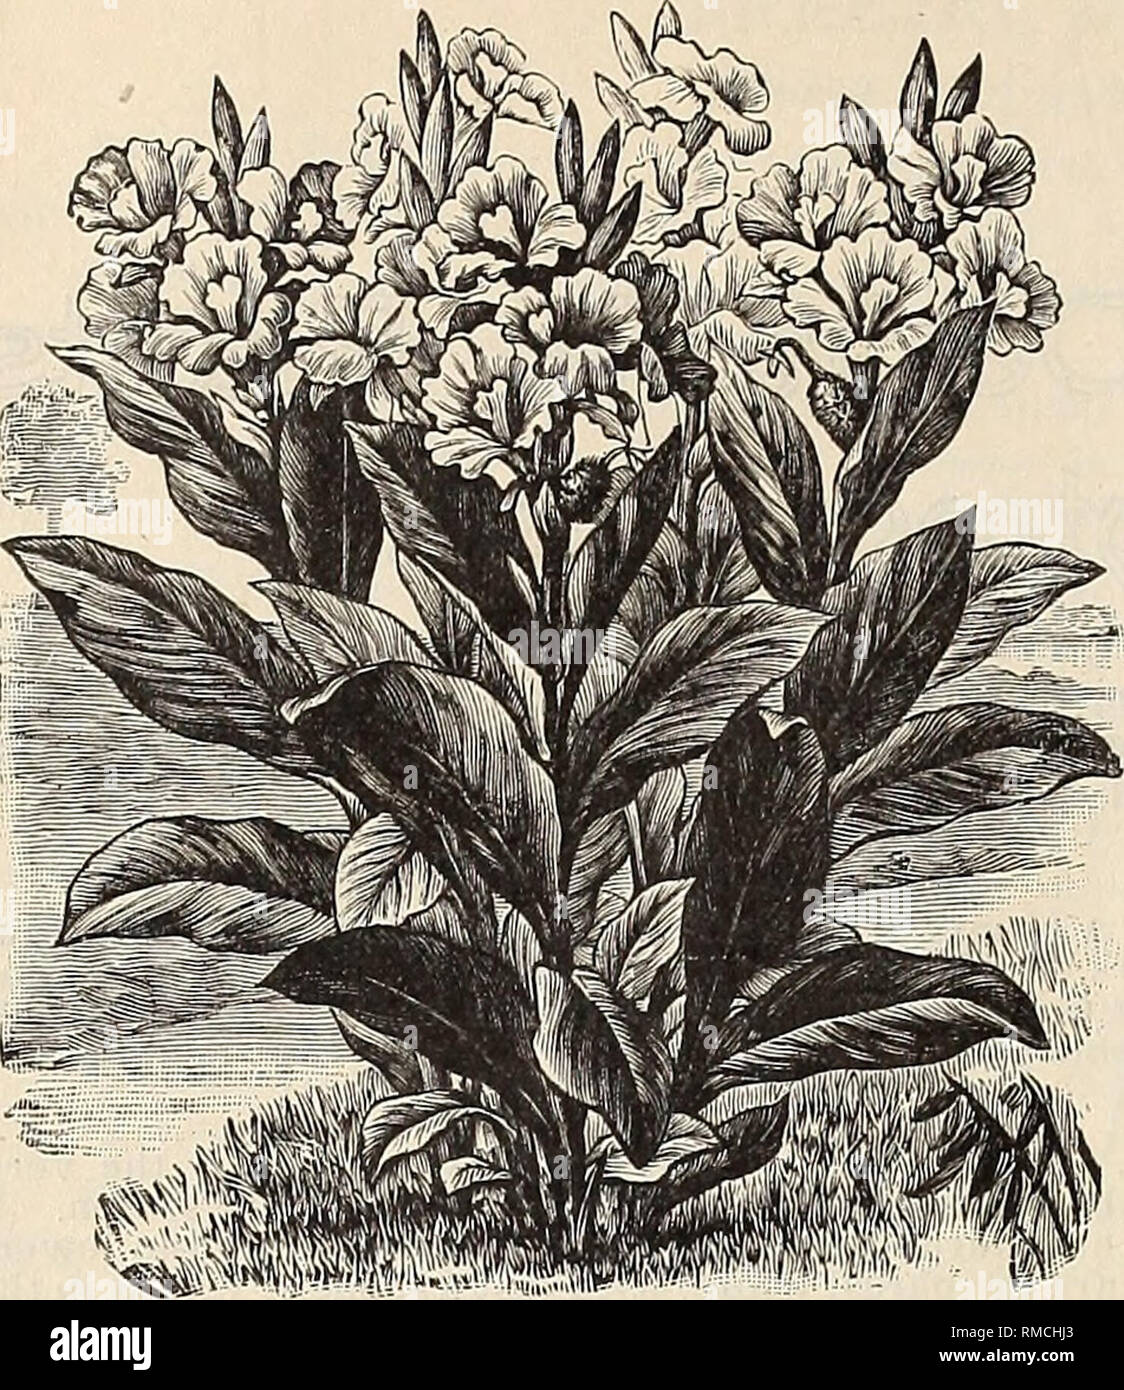 . Annual illustrated and descriptive catalogue of new, rare and beautiful plants and seeds. Nurseries (Horticulture), Florida, Catalogs; Plants, Ornamental, Catalogs; Flowers, Catalogs; Tropical plants, Catalogs; Fruit trees, Seedlings, Catalogs. The American Exotic Nurseries. Seven Oaks. Florida.. Canna flaccida. CALATHEA CROTALIFERA. ( Tlie Rattlesnake Plant.) A stately plant, closely related to the Marantas. The leaves are a rich, lustrous green, with prominent lighter nerves, and on full grown plants measure two by three feet, borne on long arching petioles. Among the unique and interestin Stock Photo